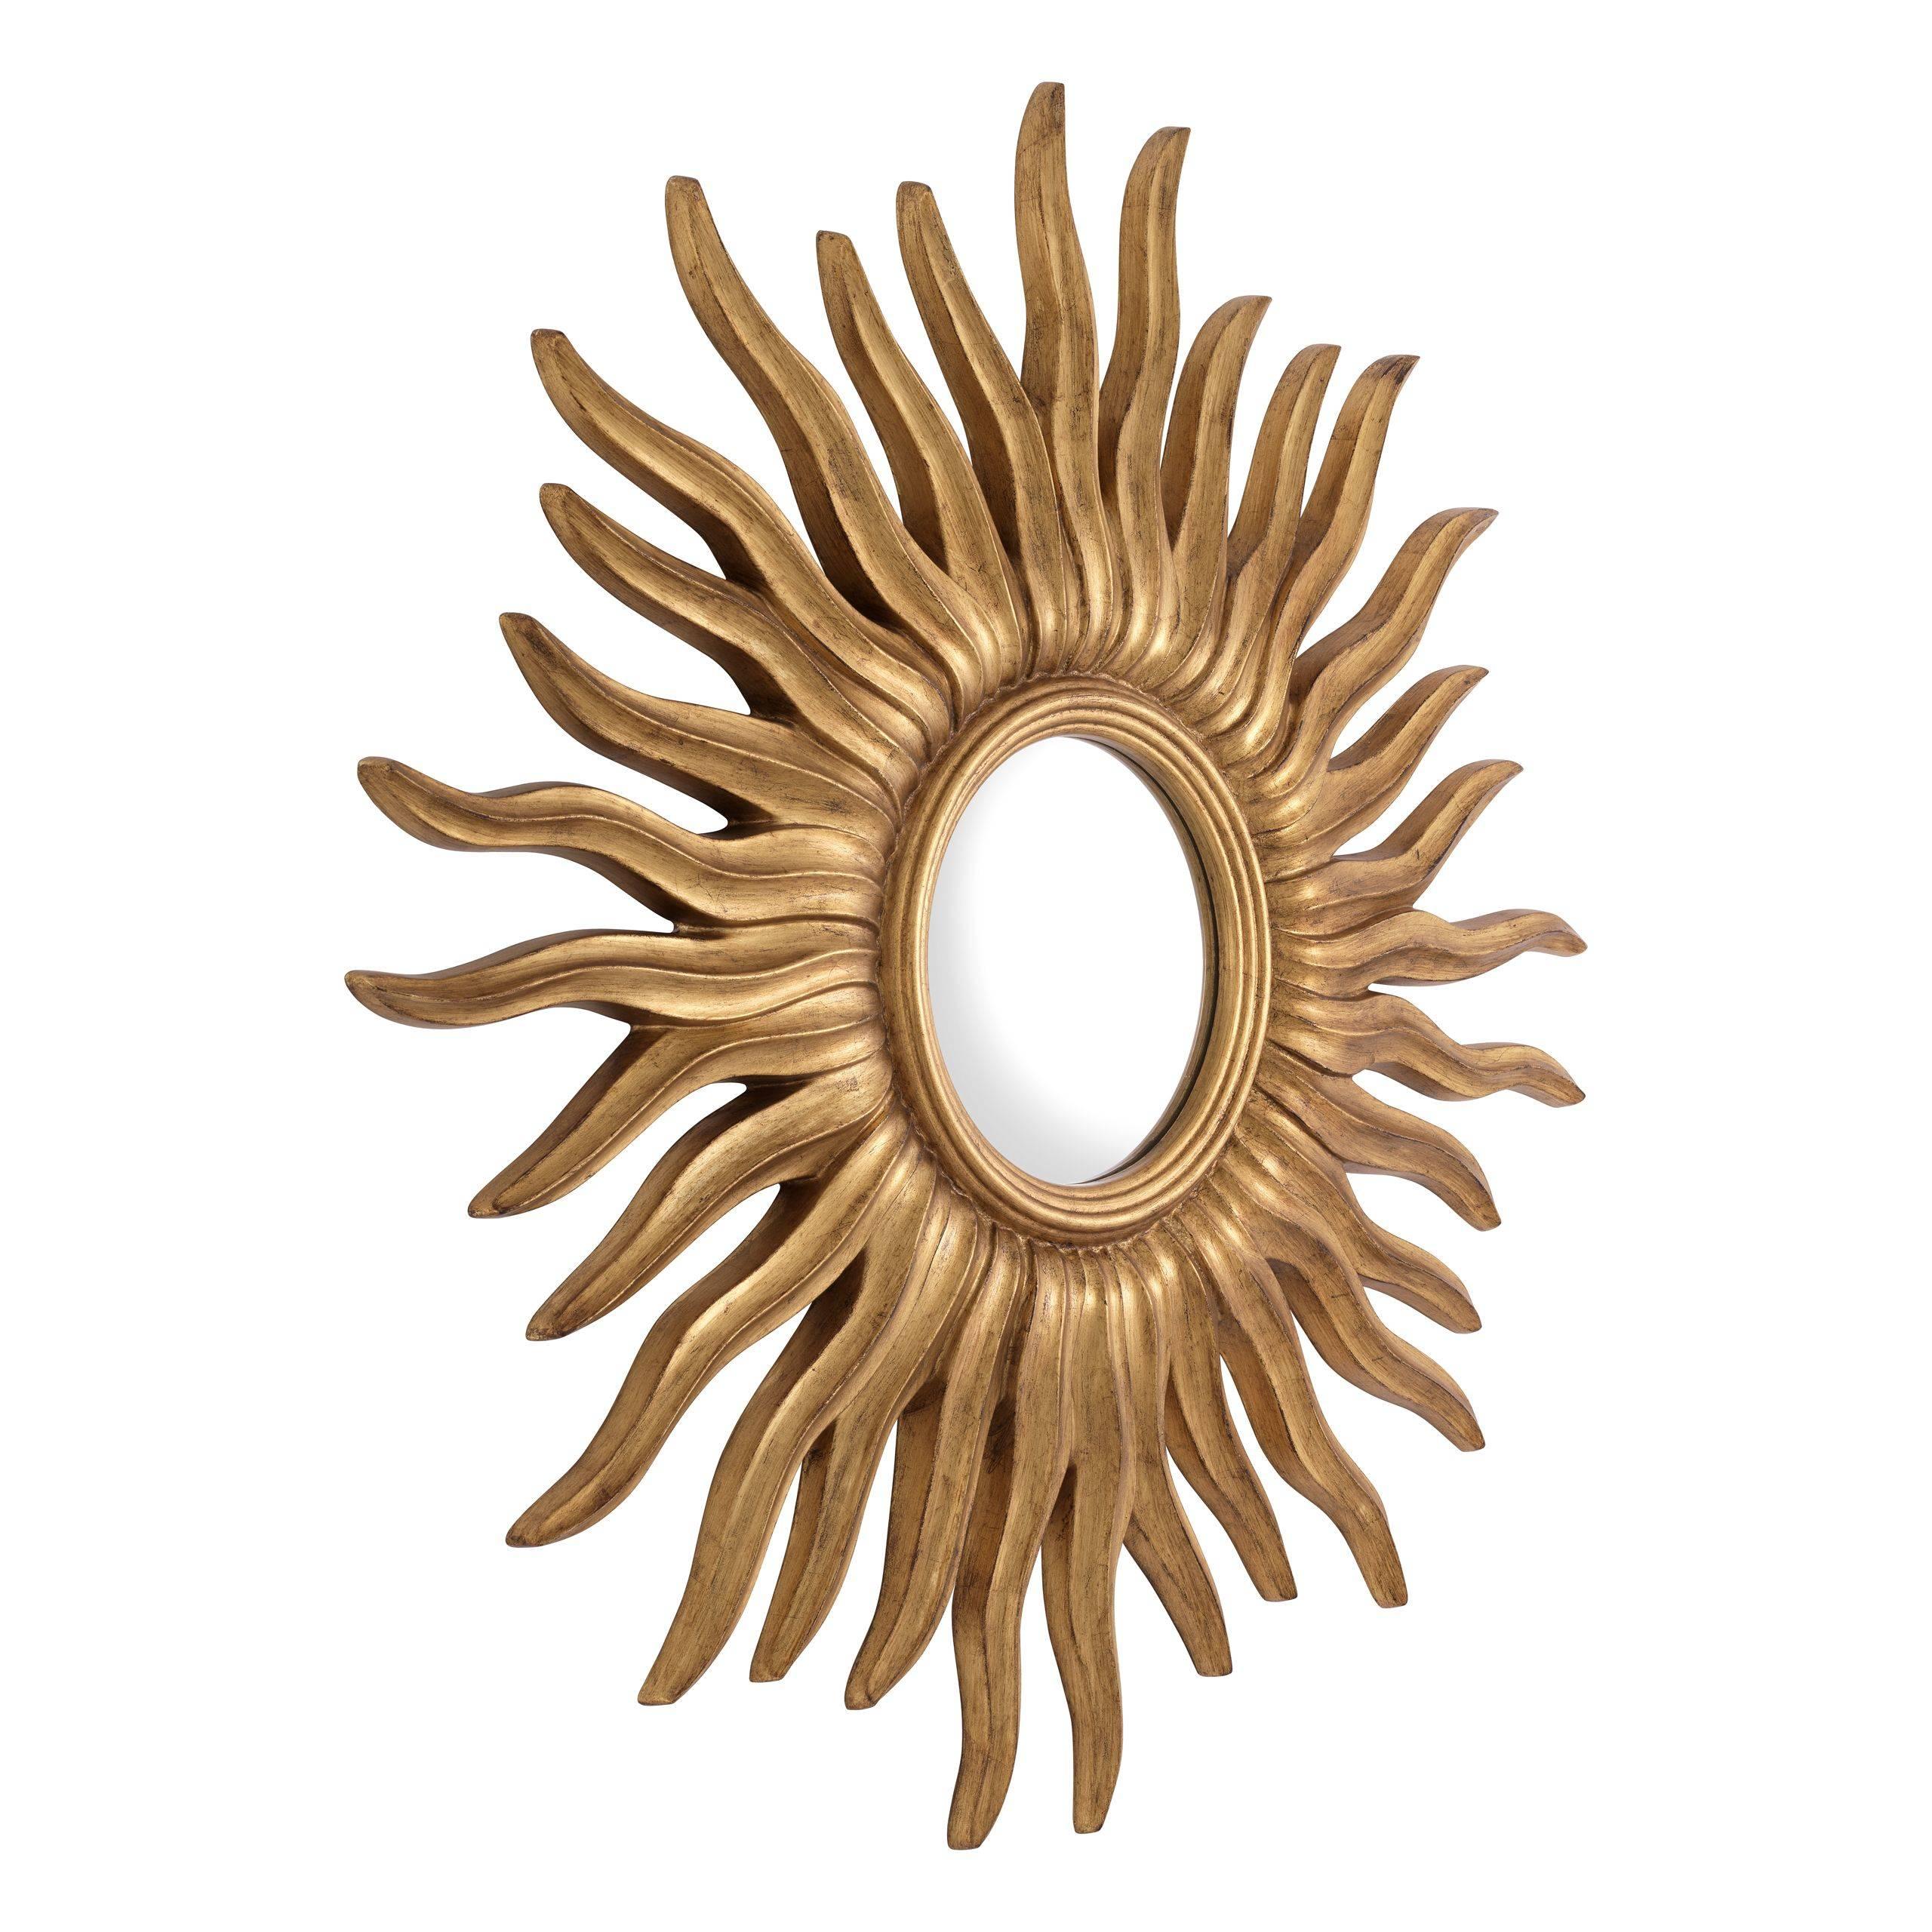 This round convex mirror with sunburst frame has an antique gold finish. The mirror makes for a magical and artistic wall decoration for the space. 

Measurements:

2” depth x 44” diameter.